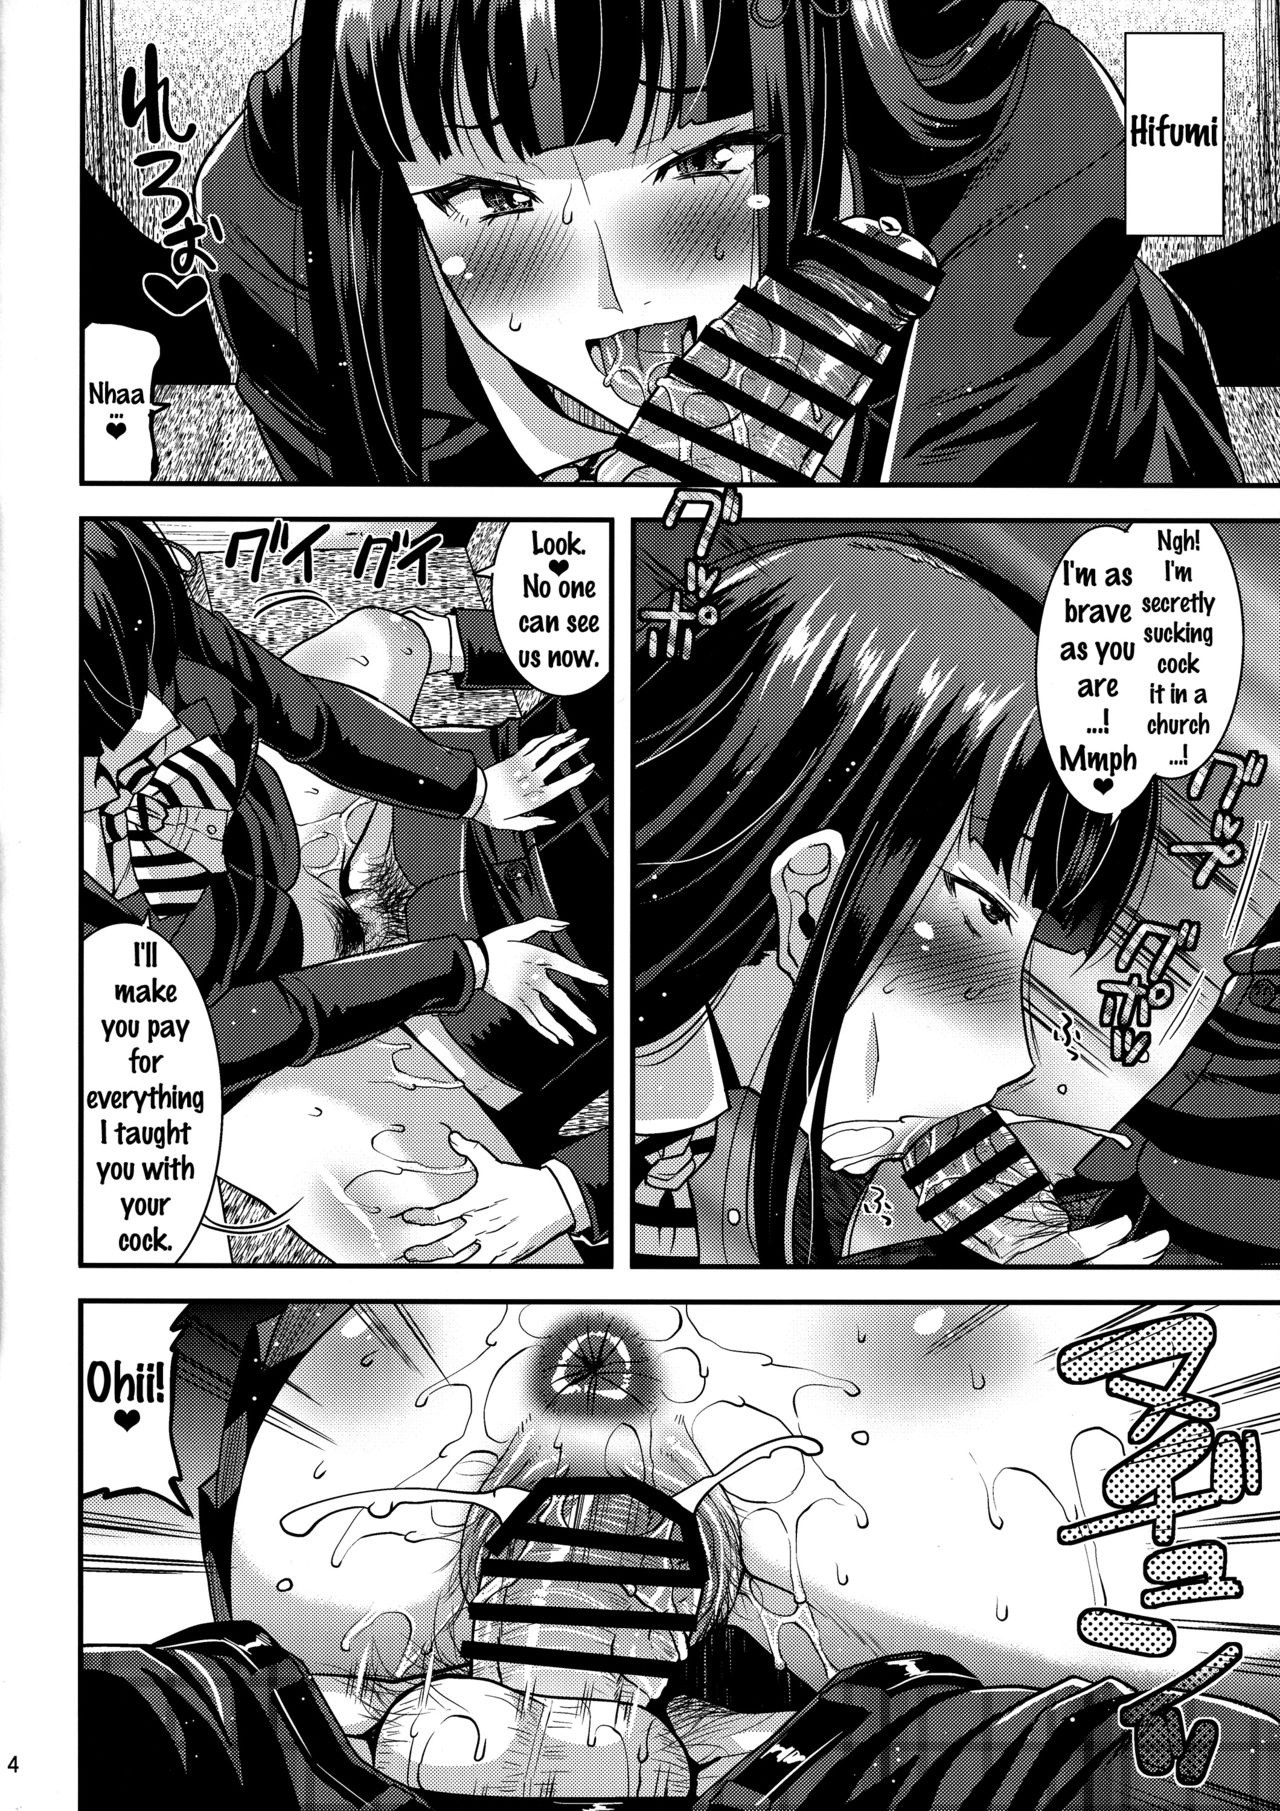 LET US START THE SEX hentai manga picture 3